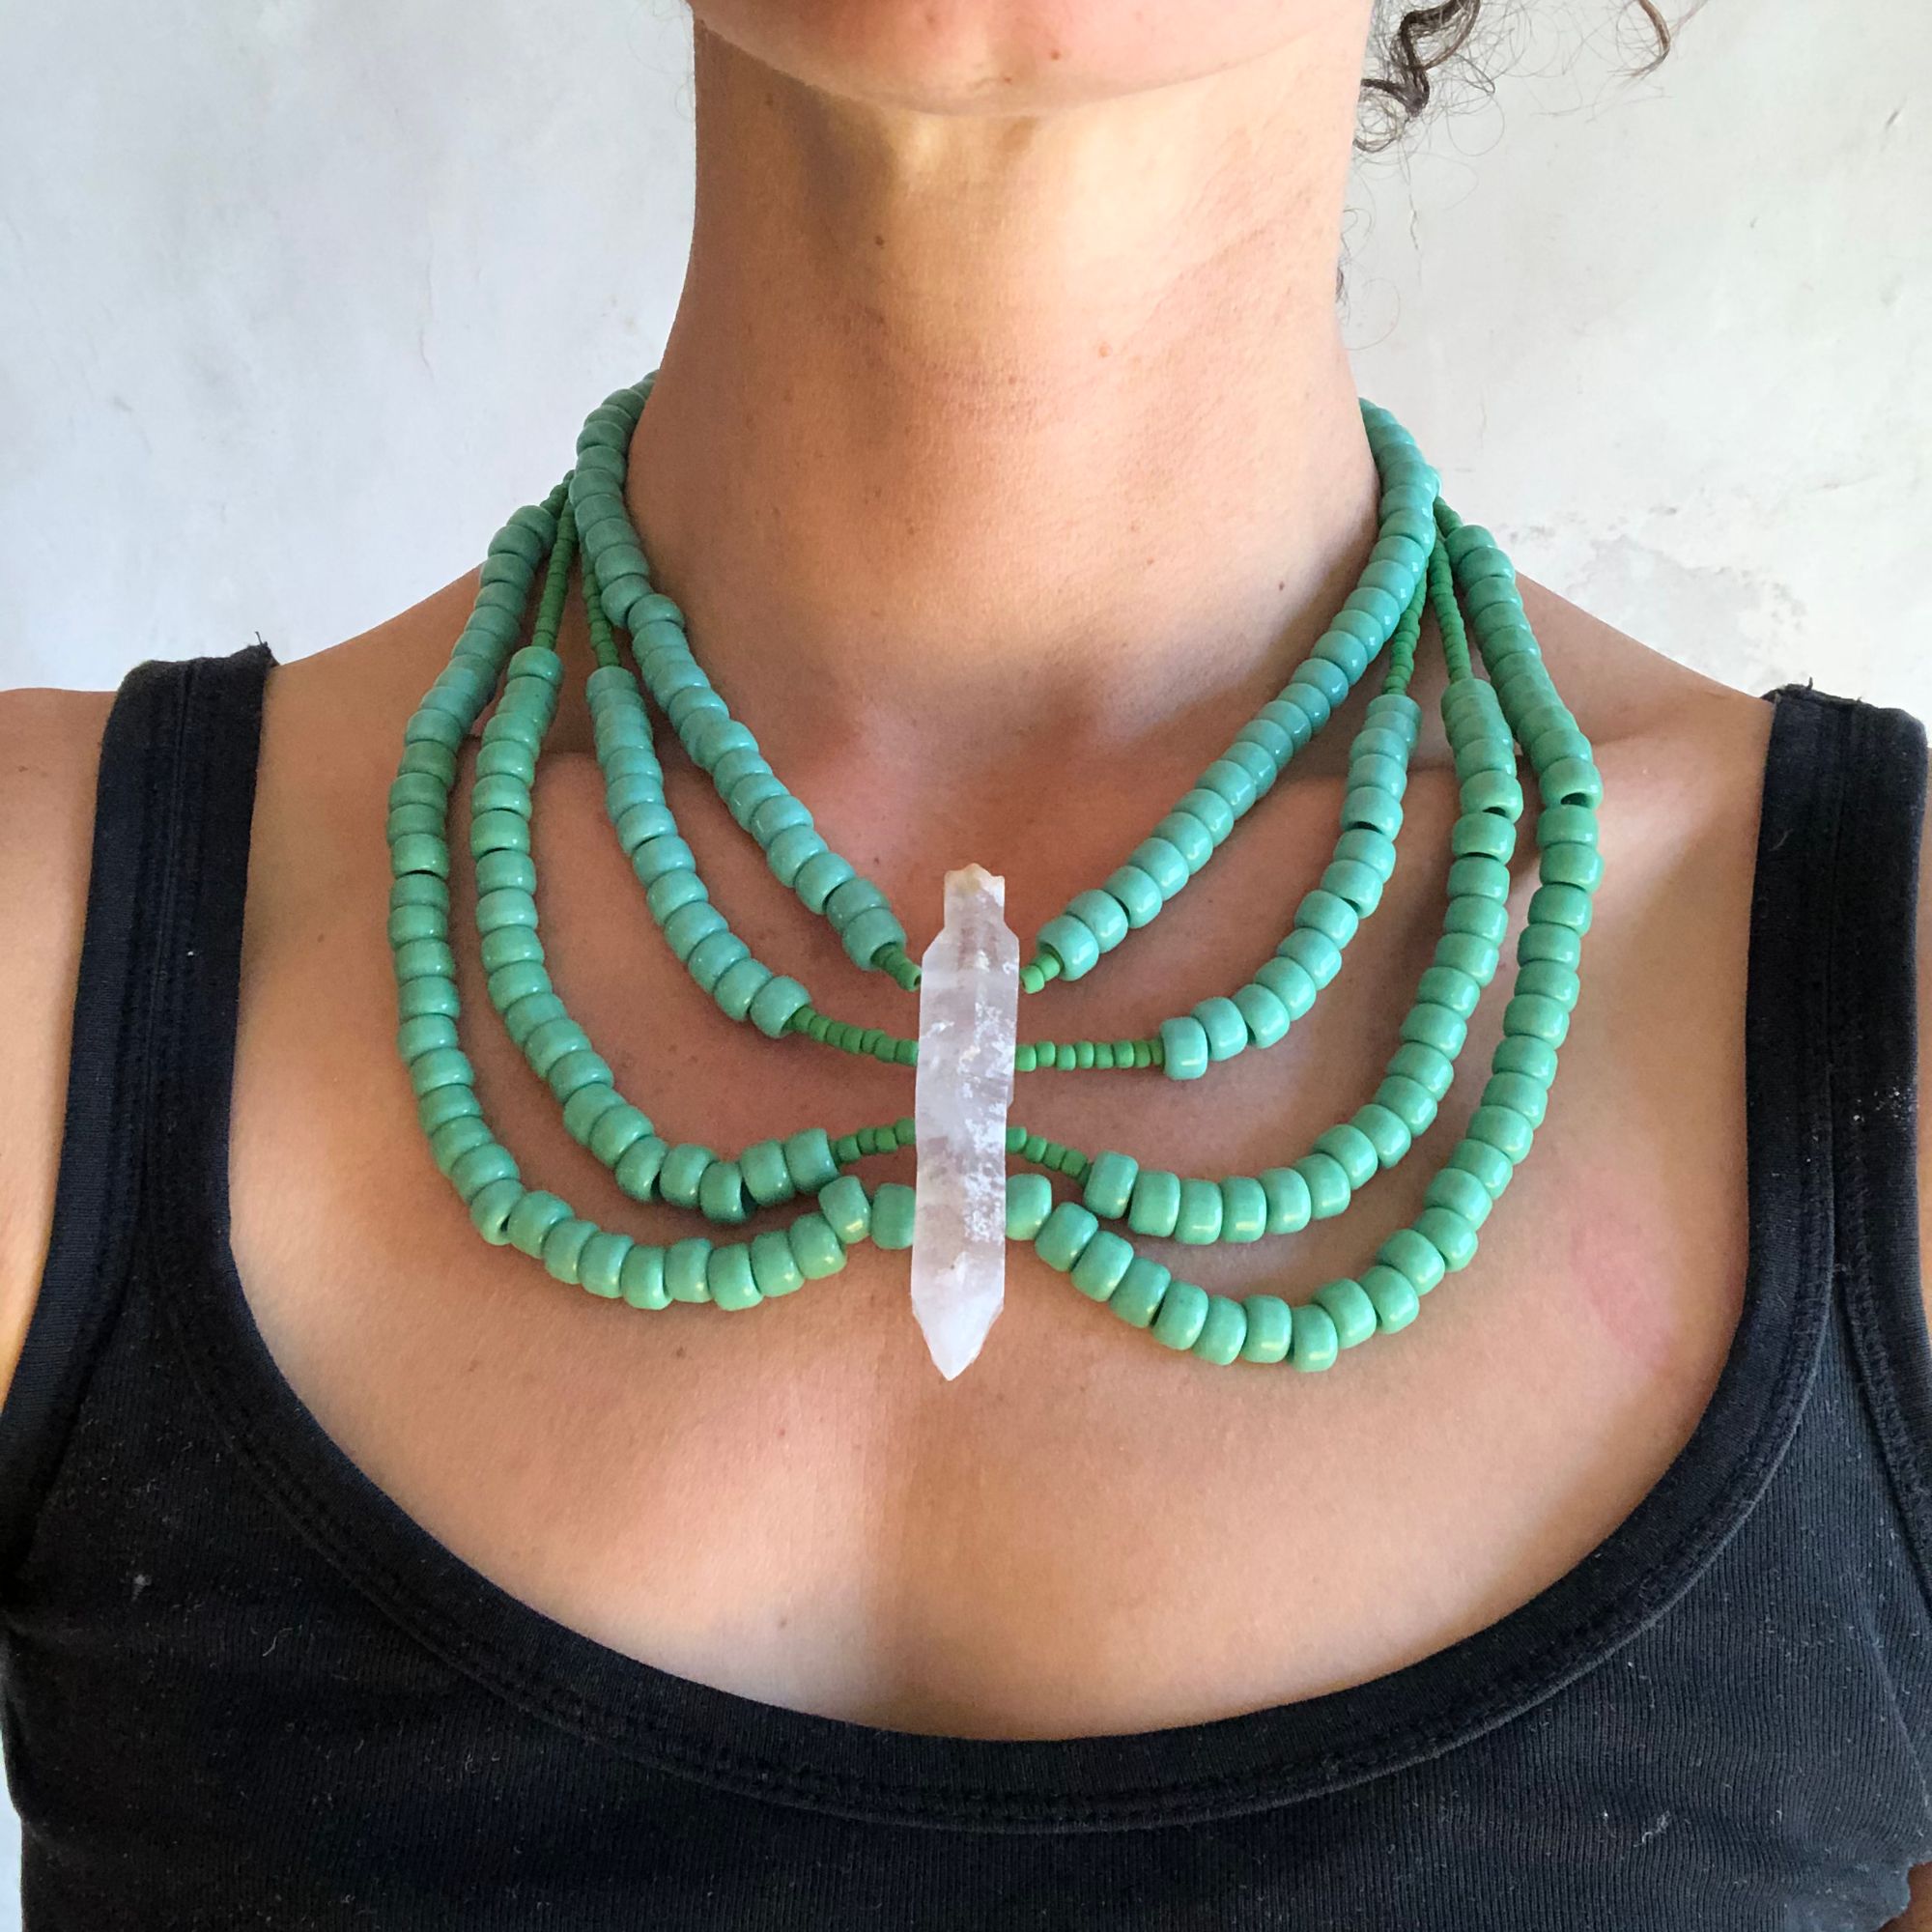 Woman wearing Green beaded necklace with a large double terminated quartz stone at the center